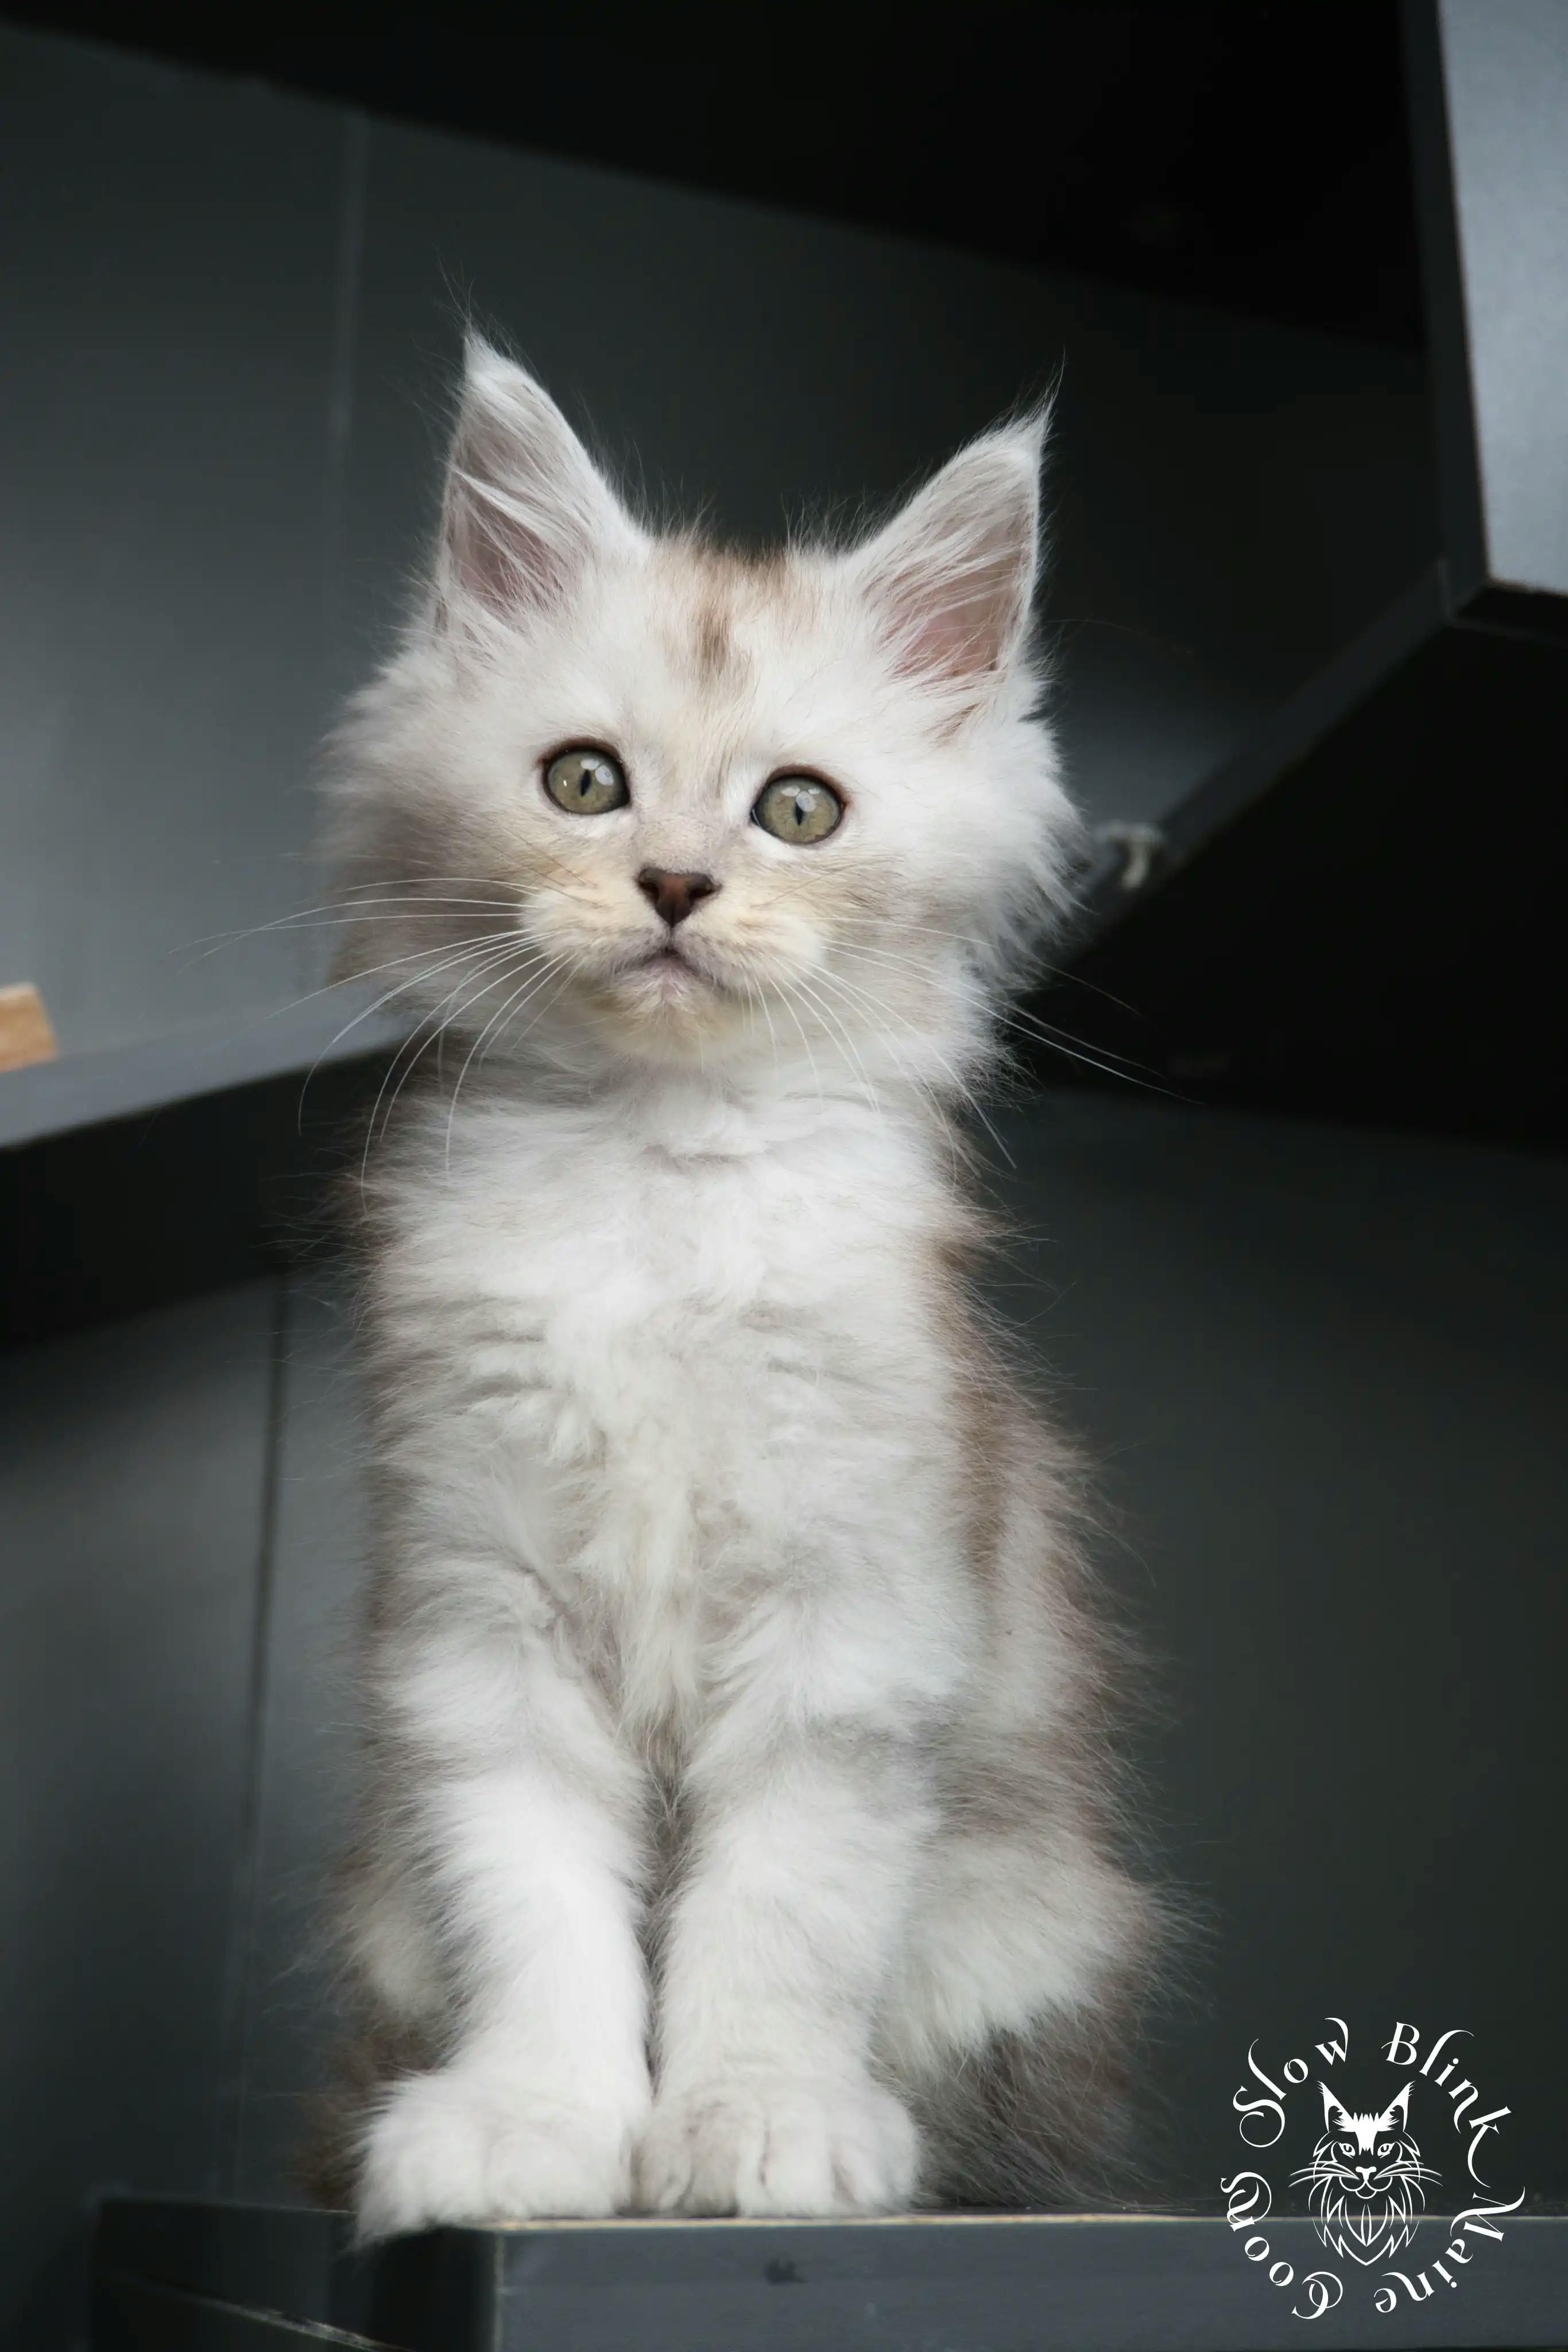 High Silver Maine Coon Kittens > black silver tabby maine coon kitten | ems code ns 22 23 24 25 | slowblinkmainecoons | 456